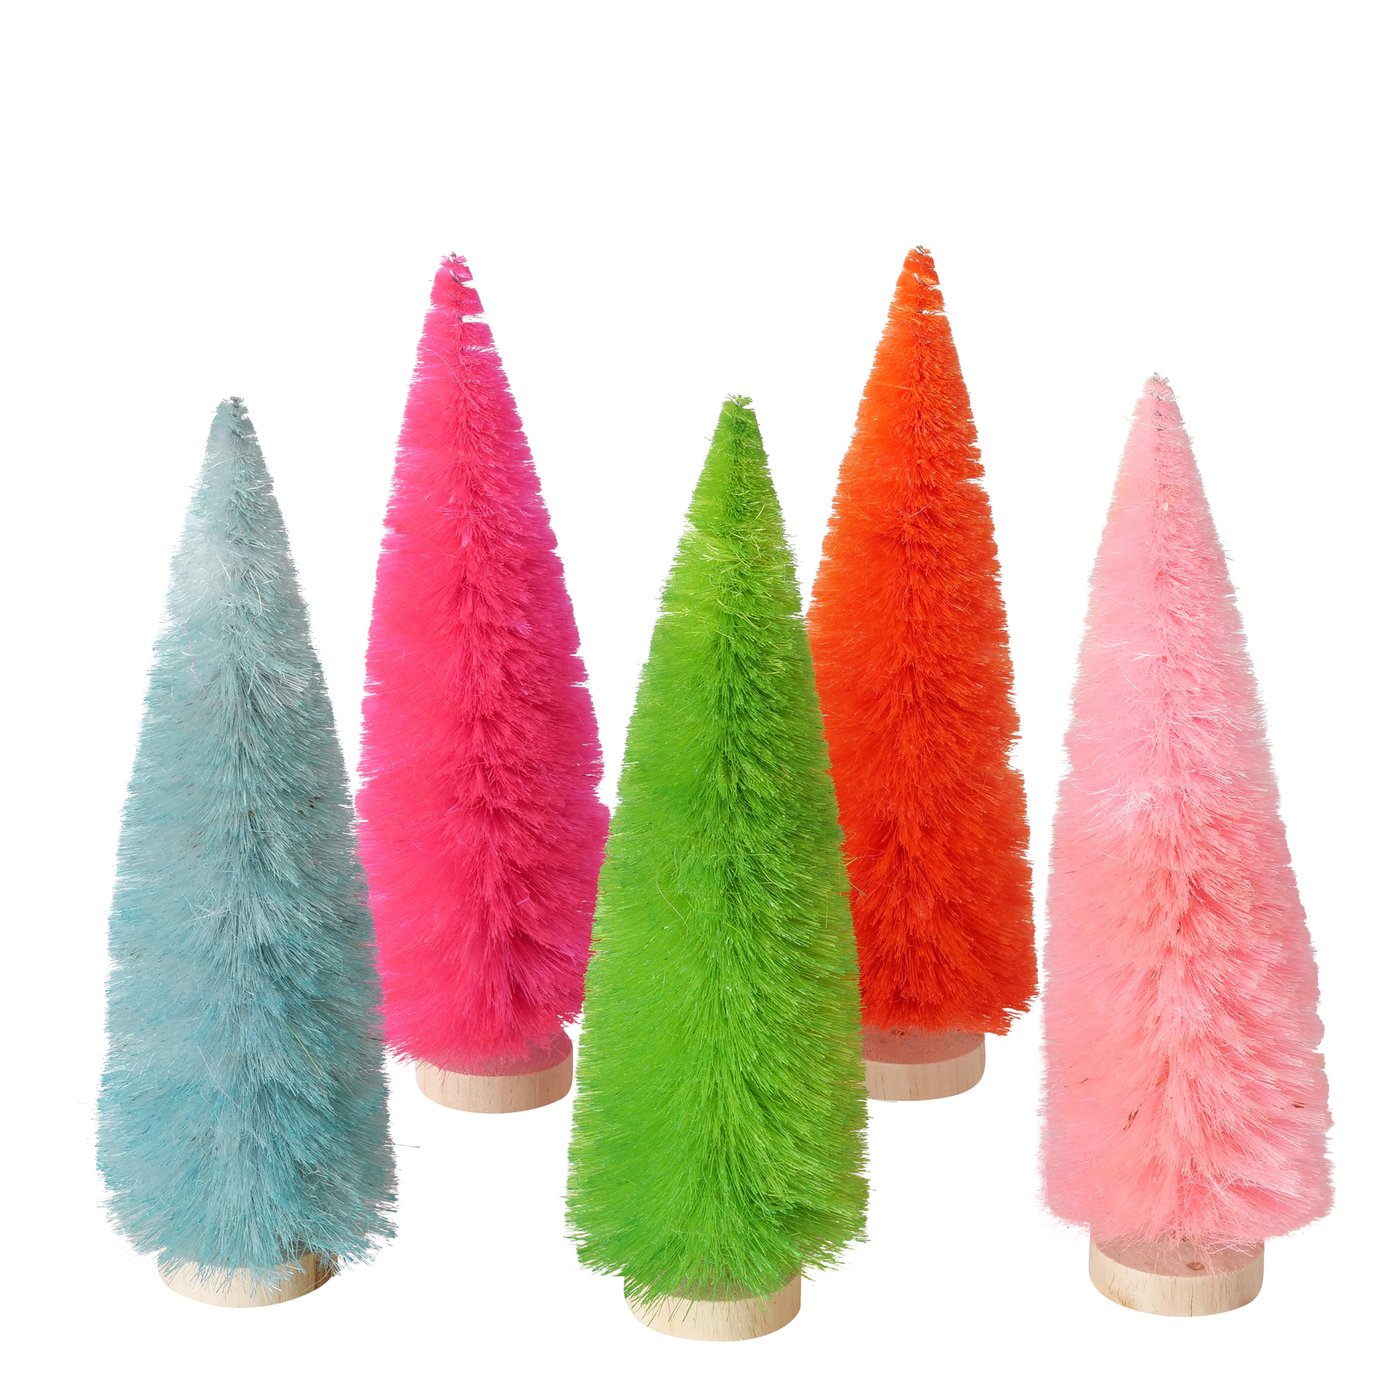 &Quirky Neon Bottle Brush Tree Tall : Orange, Green, Blue, Pink & Bright Pink